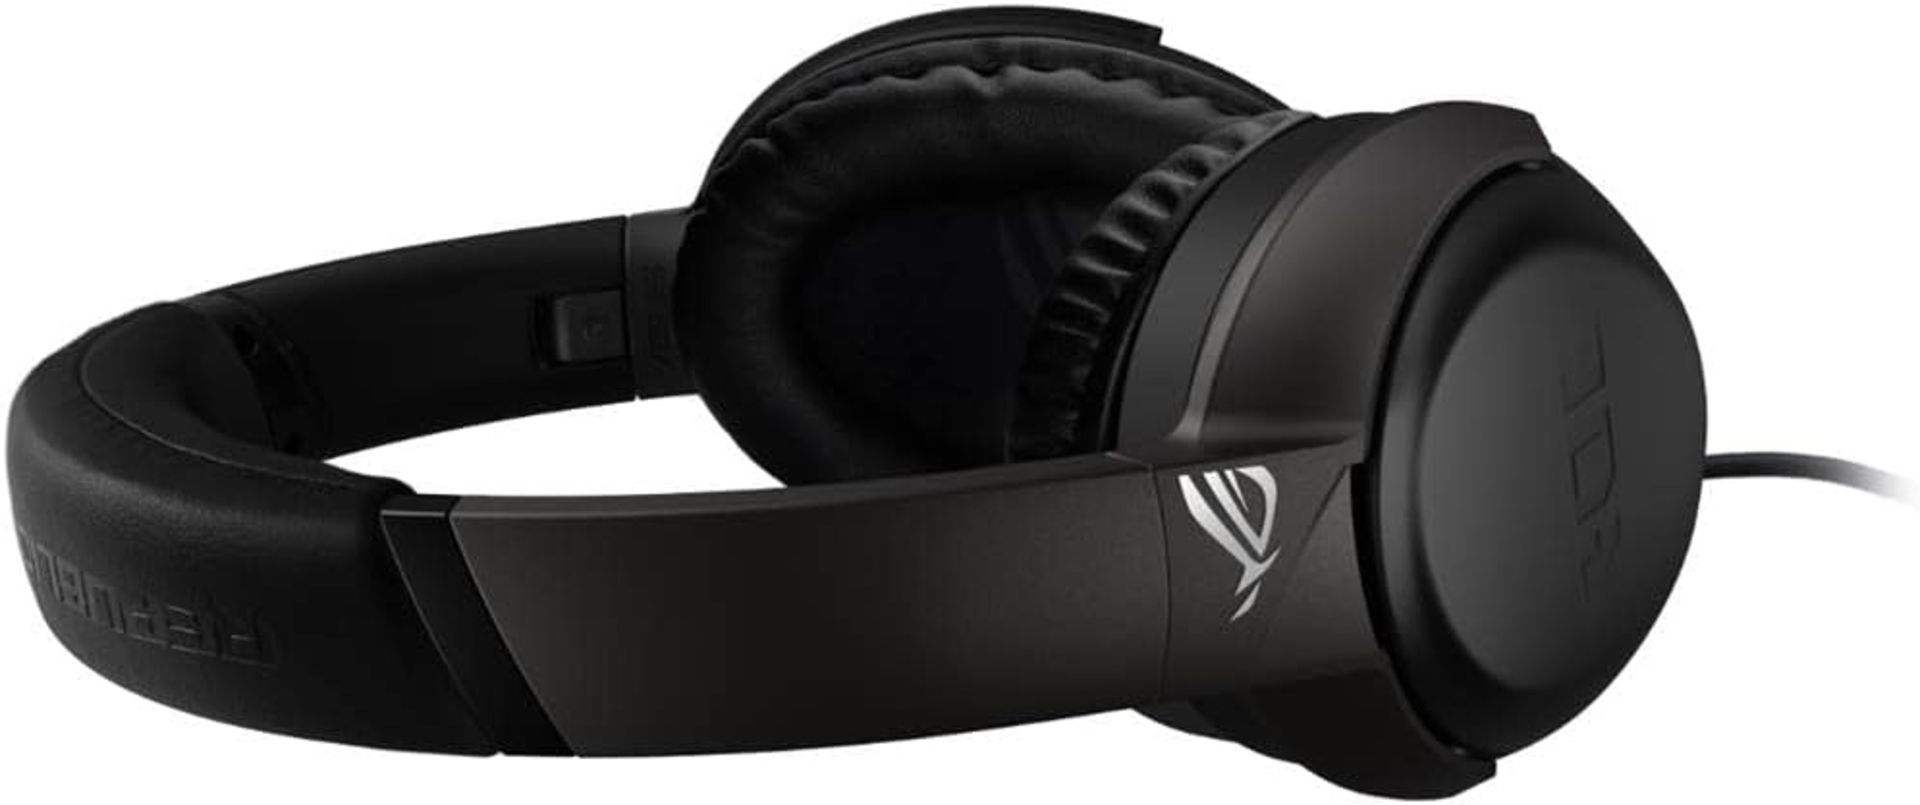 BRAND NEW FACTORY SEALED ASUS ROG Strix Go Core Gaming Headset. RRP £79.99. Exclusive airtight - Image 3 of 5